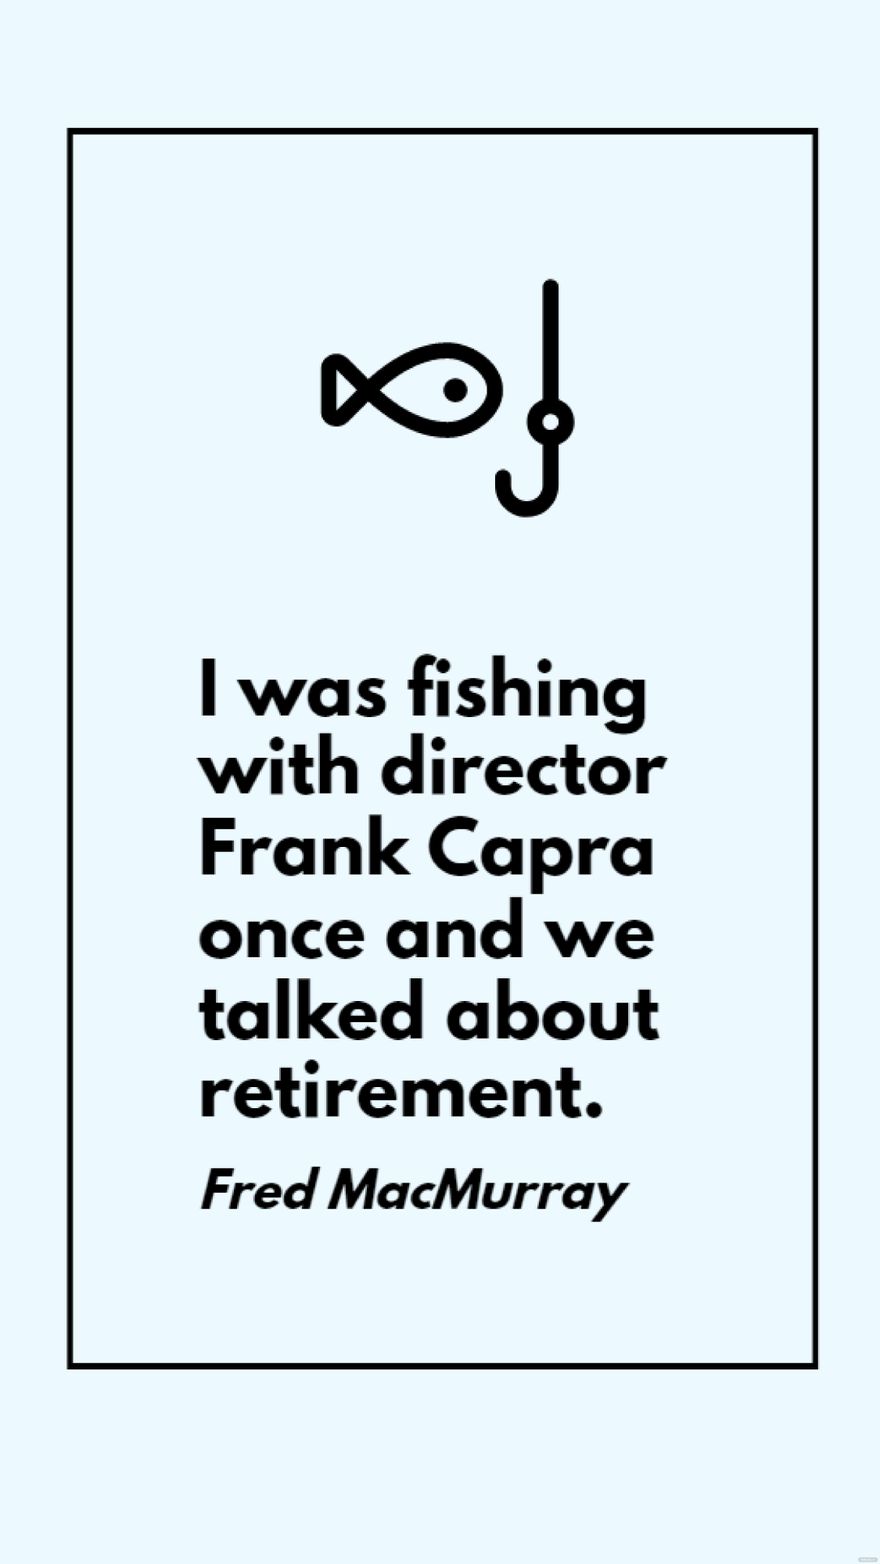 Fred MacMurray - I was fishing with director Frank Capra once and we talked about retirement.